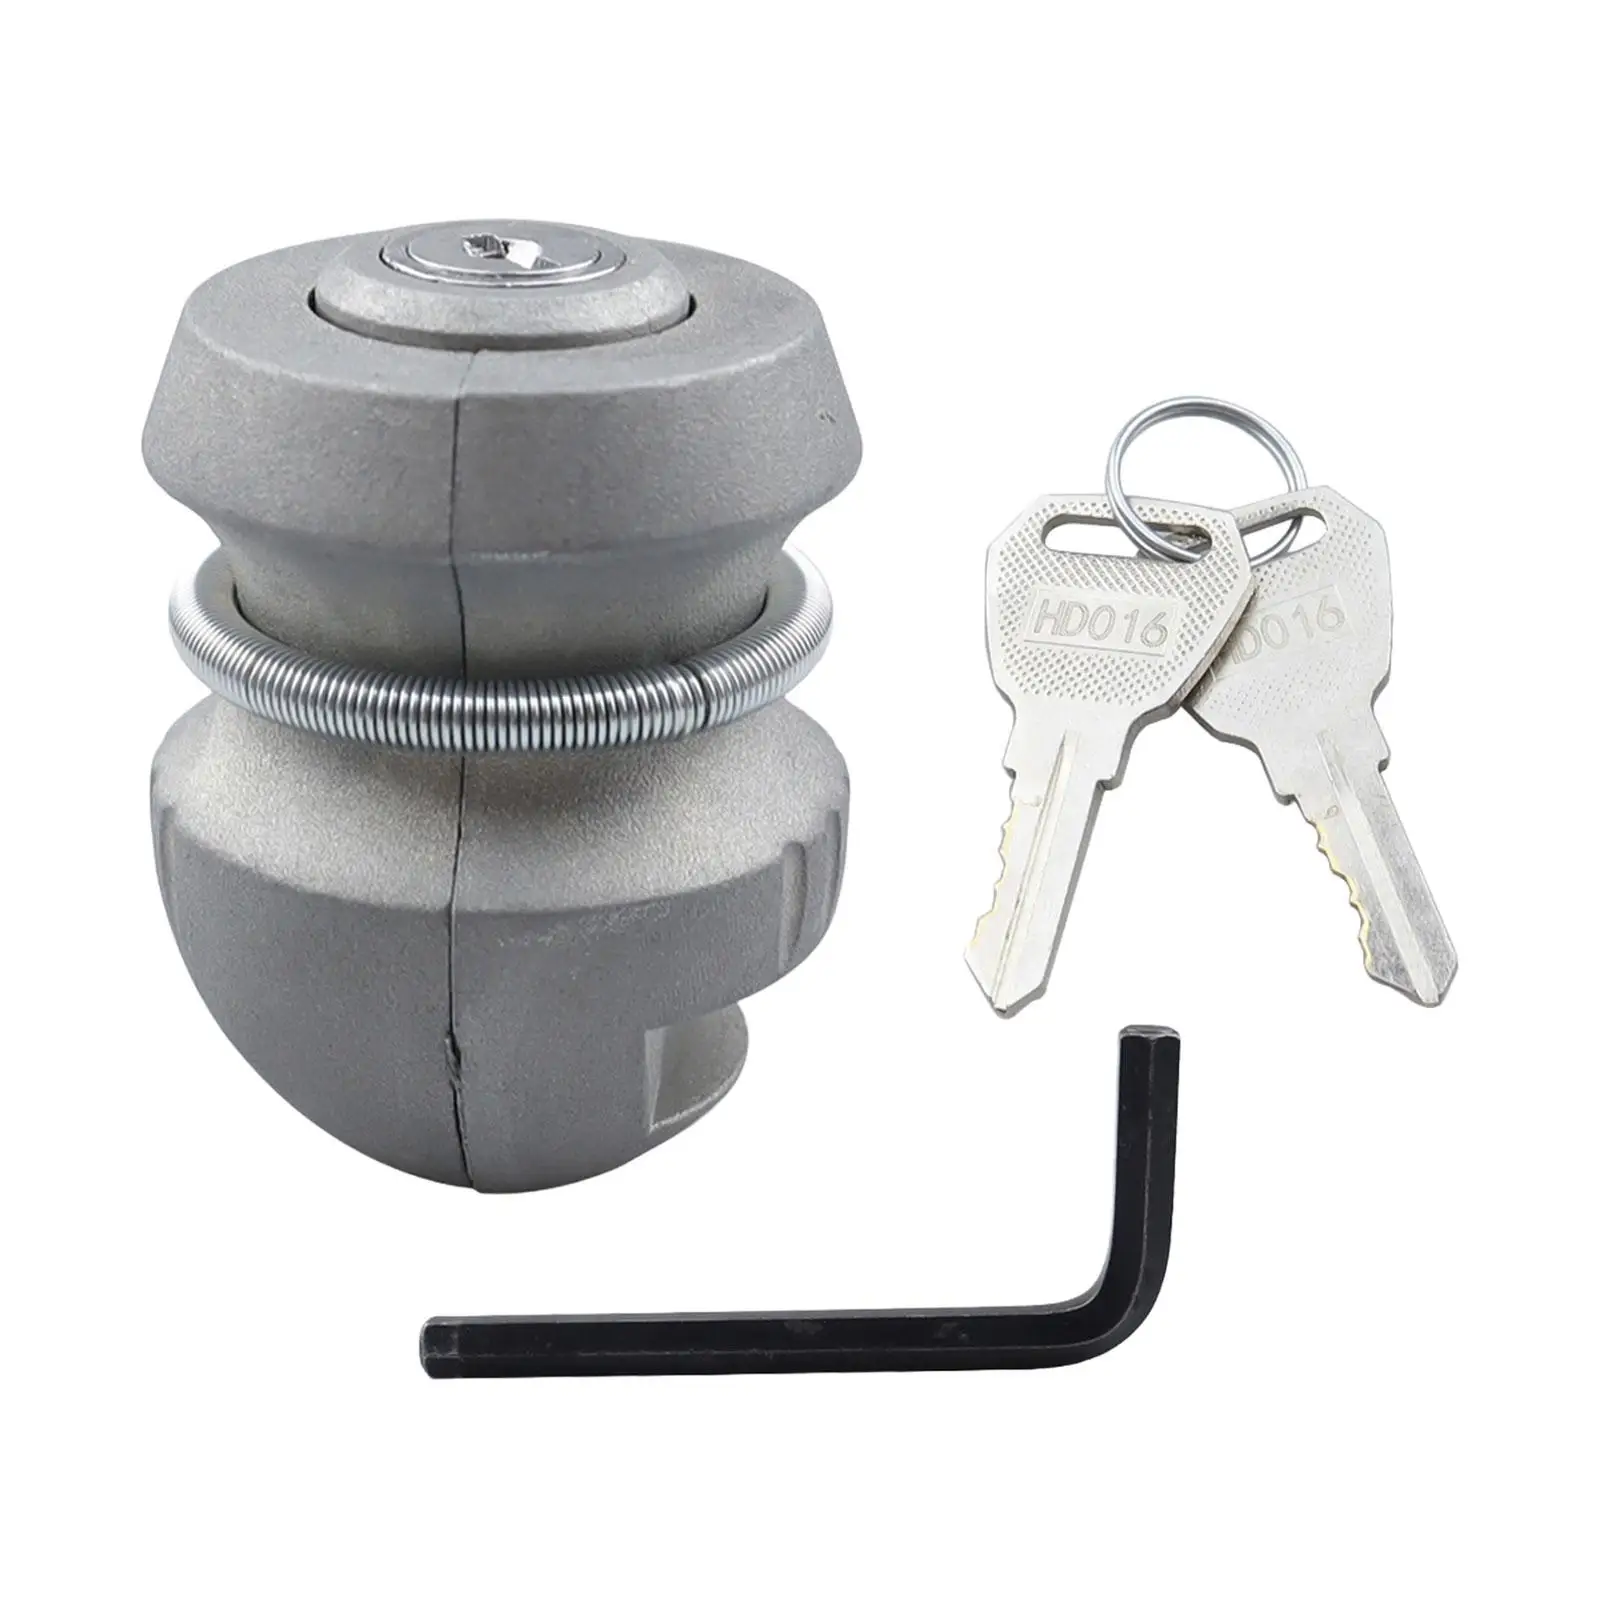 Trailer Part Coupling Lock with 2 Coupling Hitch Keys Metal Trailer Lock Trailer Hitch Replaces for Durable Premium